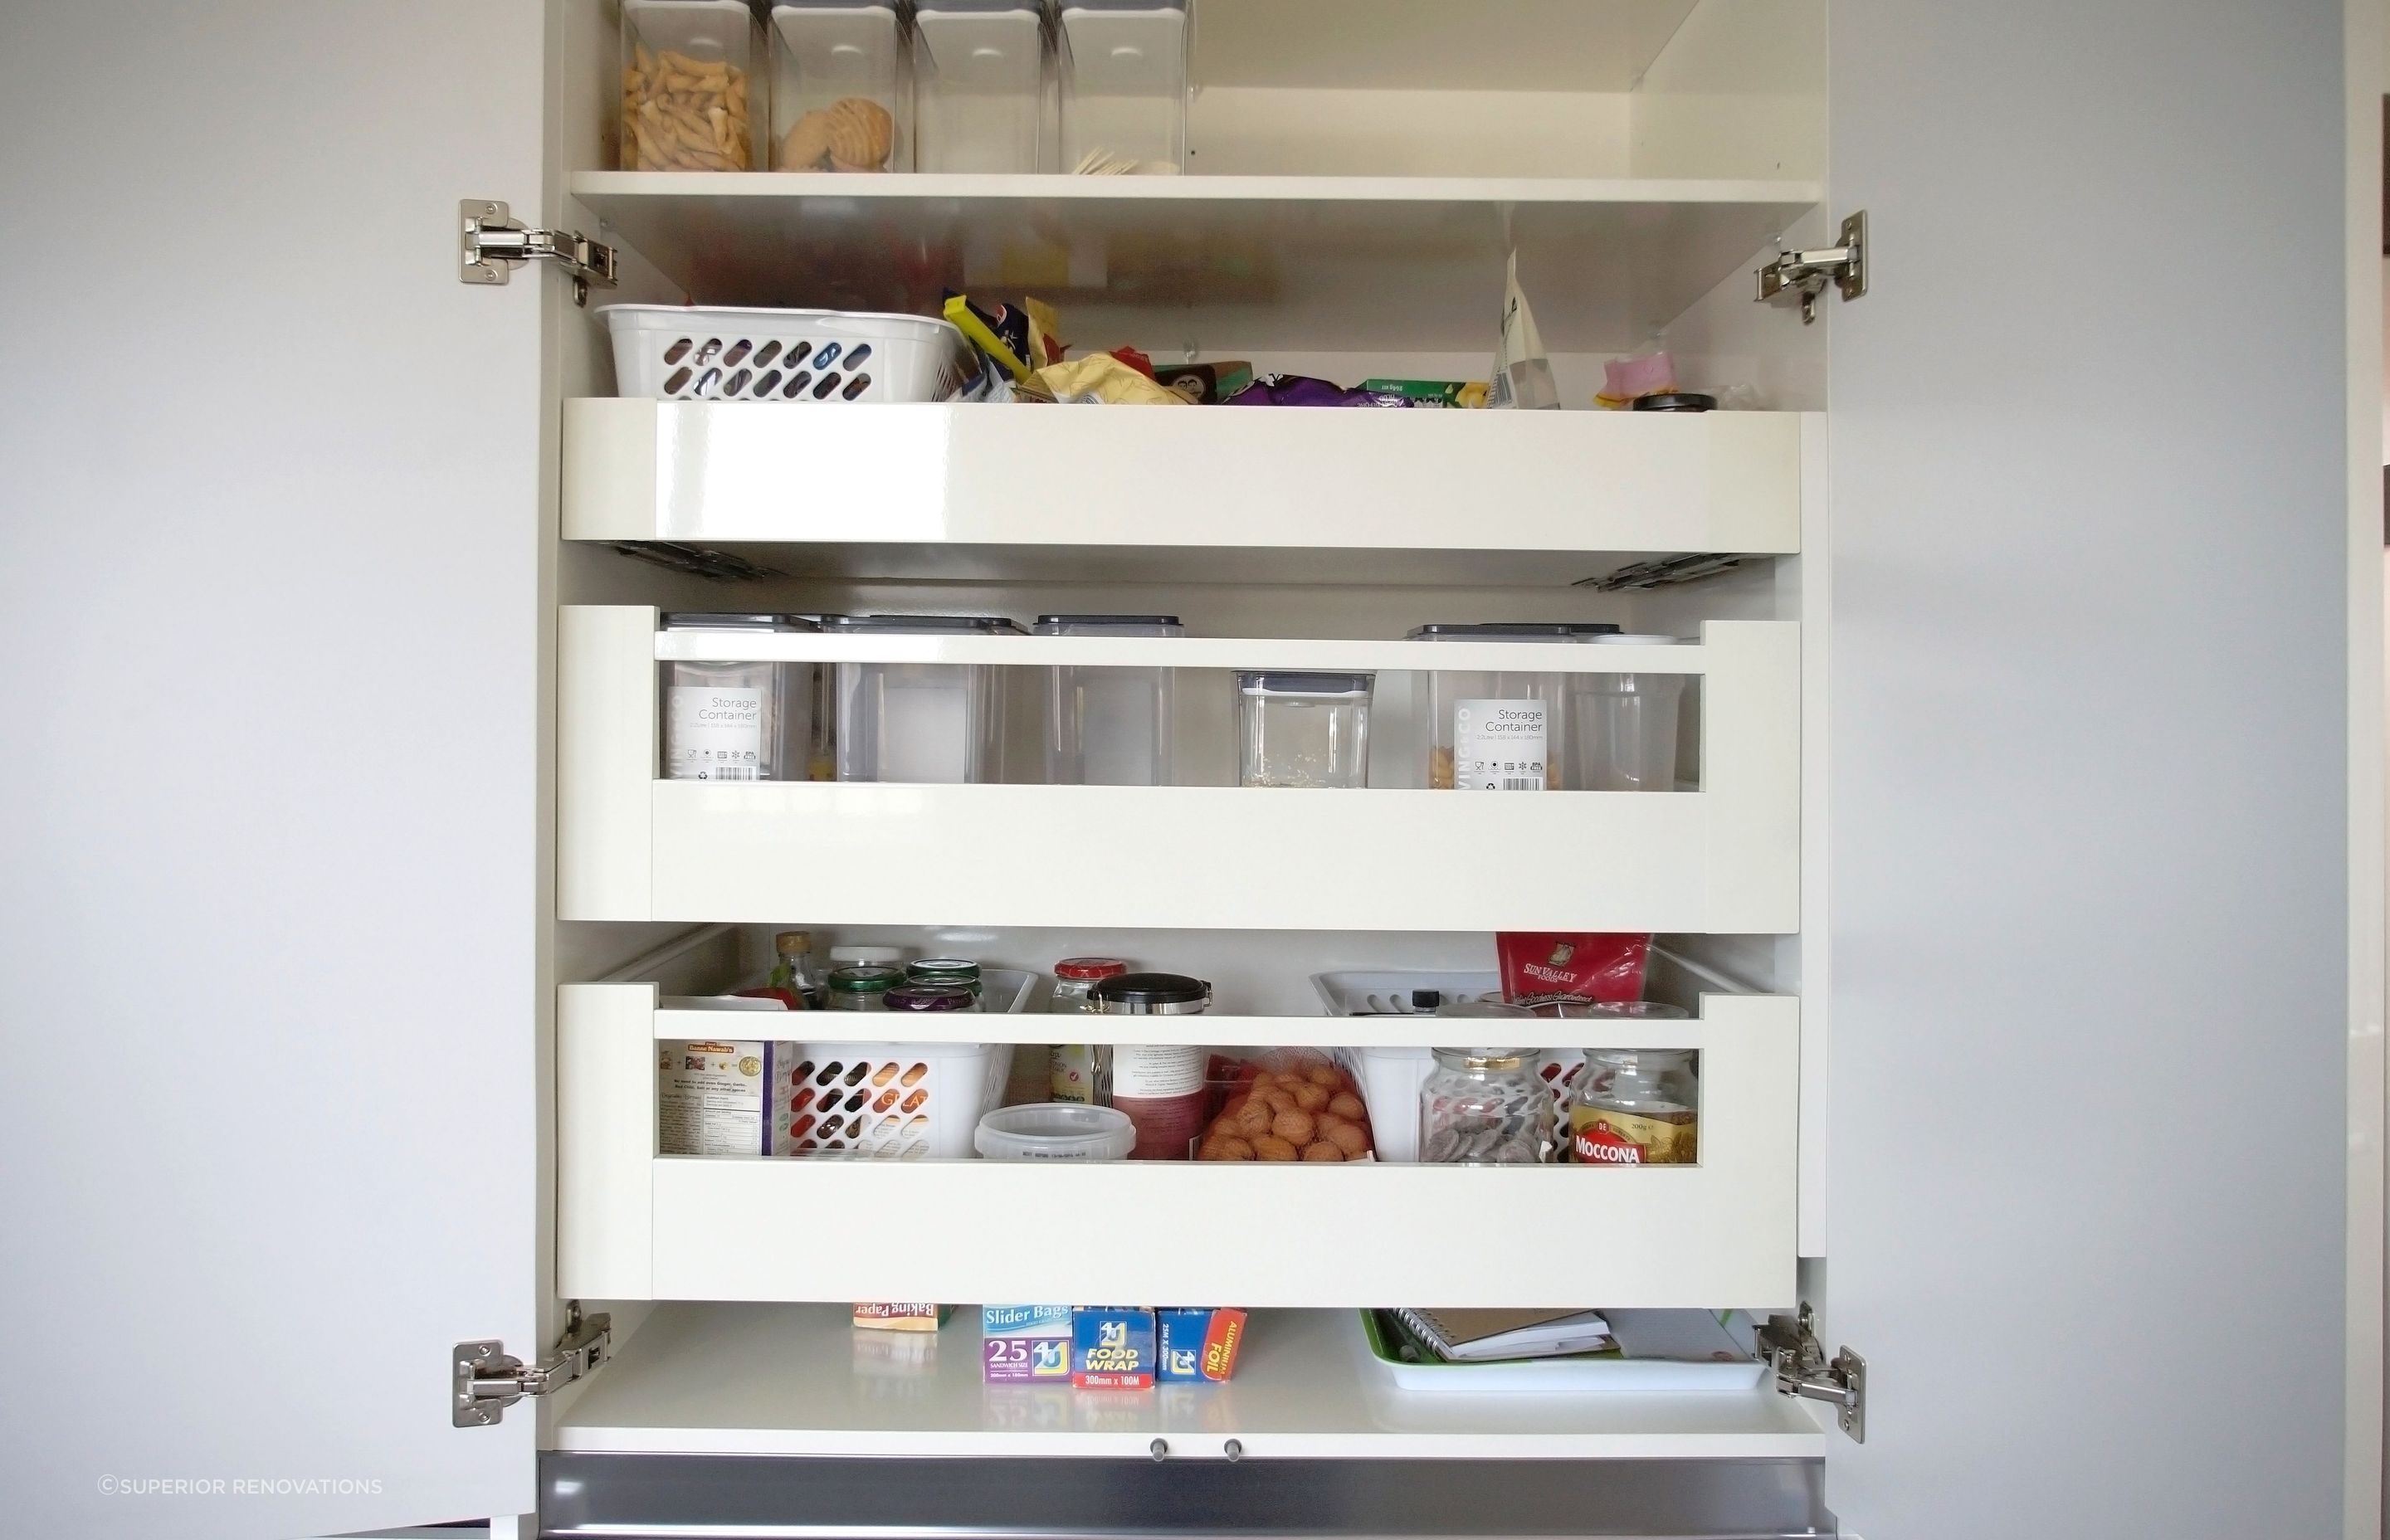 Kitchen renovation in Papatoetoe with individual pull out drawers built within the pantry.